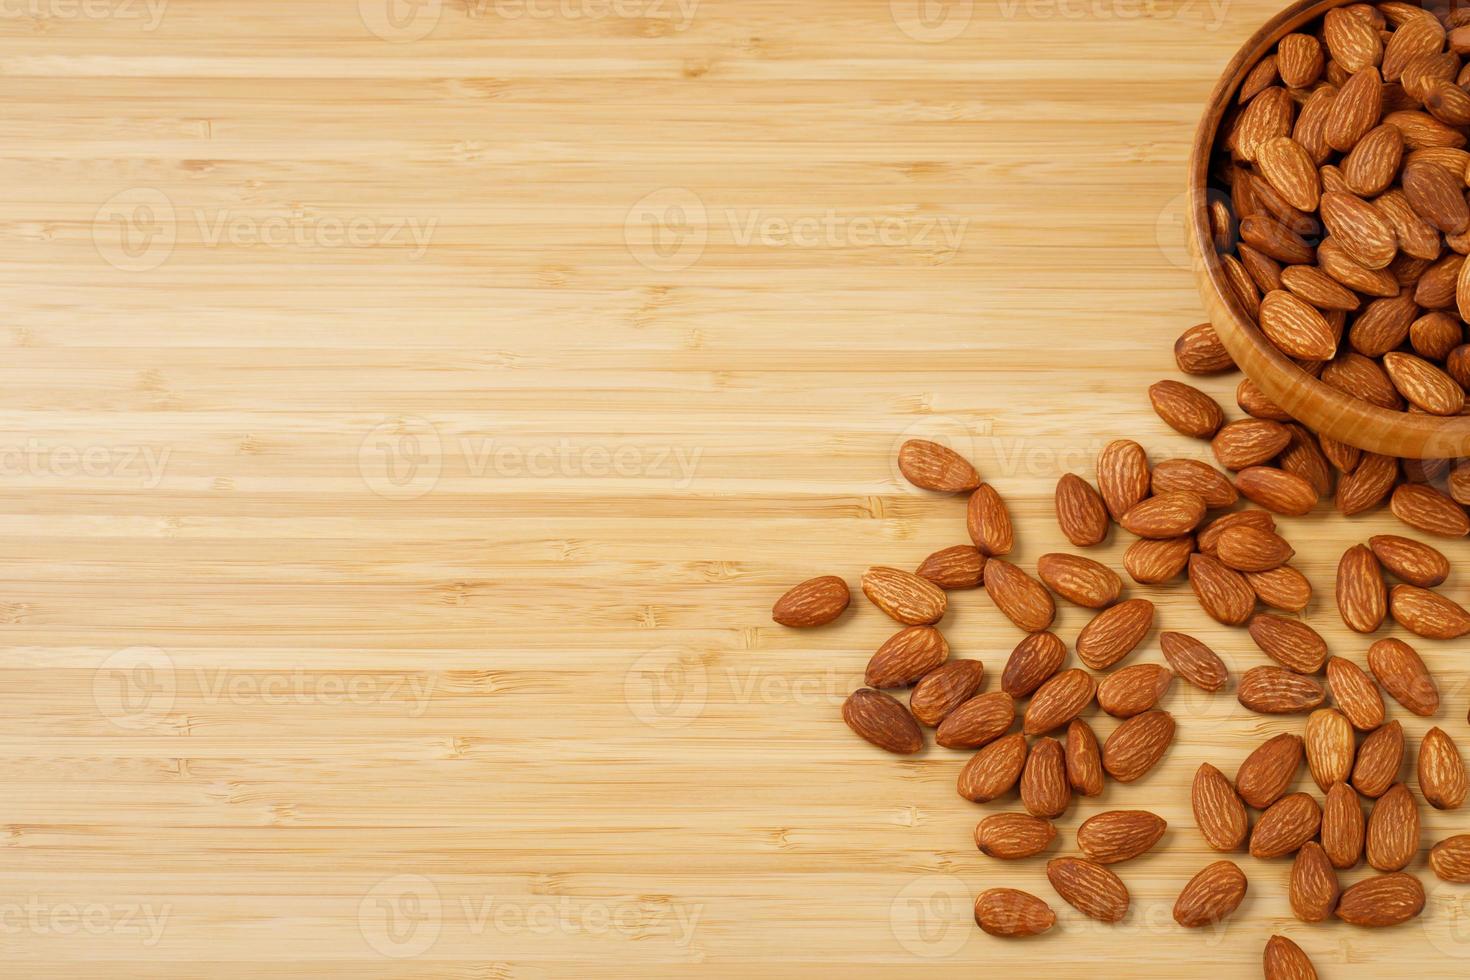 Almonds in brown wooden bowl on old wooden table background photo